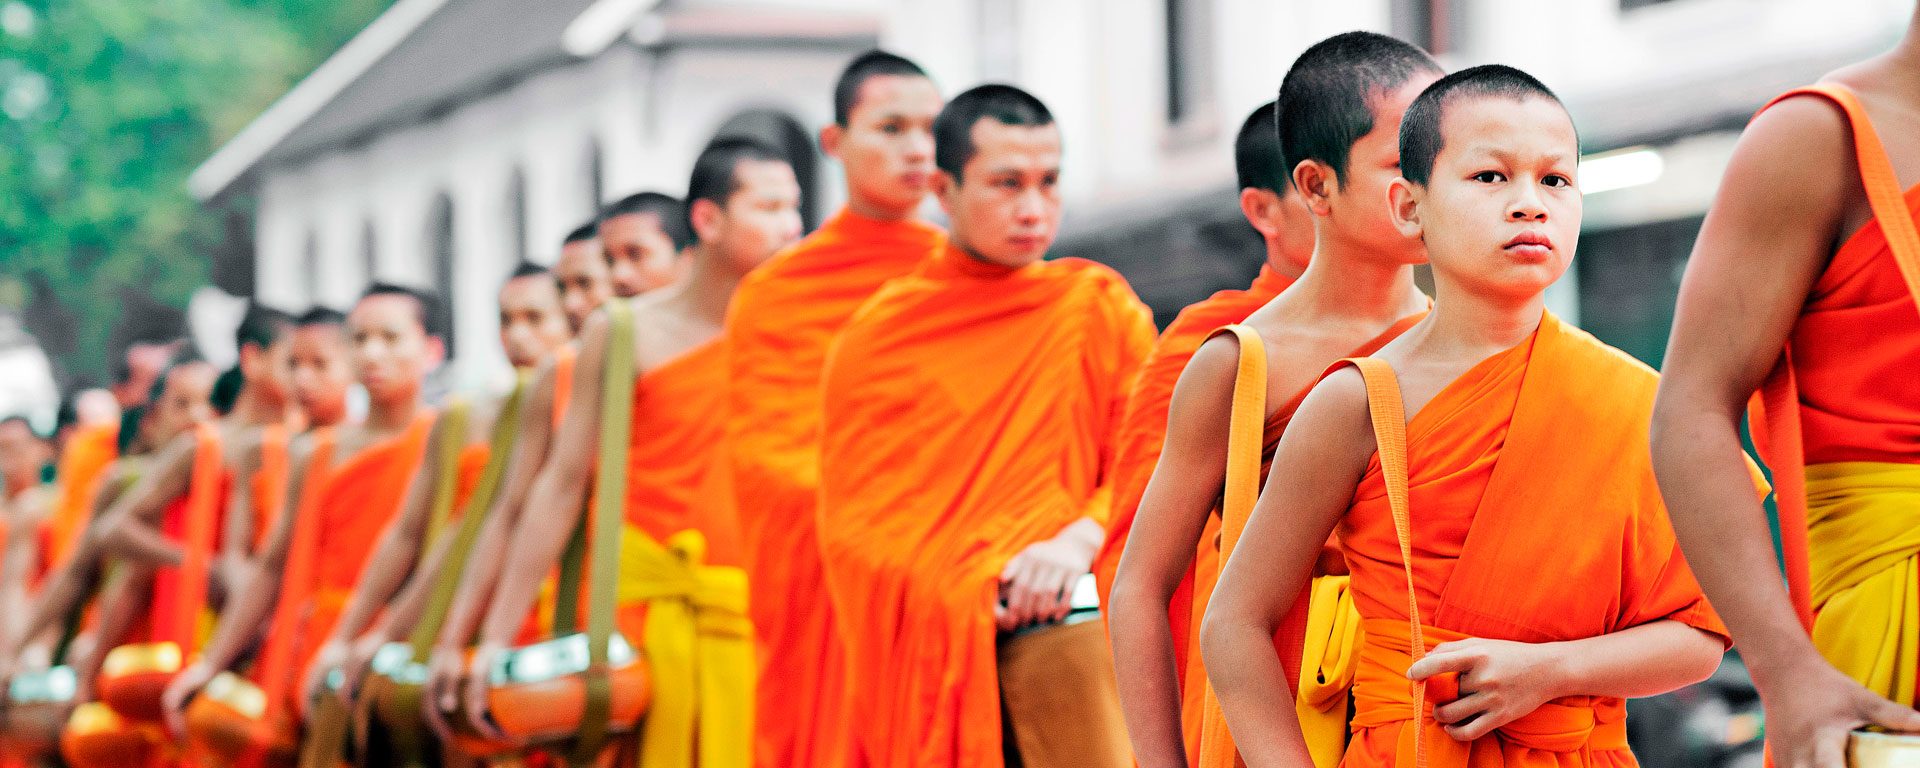 Monks processing for early morning alms in Luang Prabang, Laos